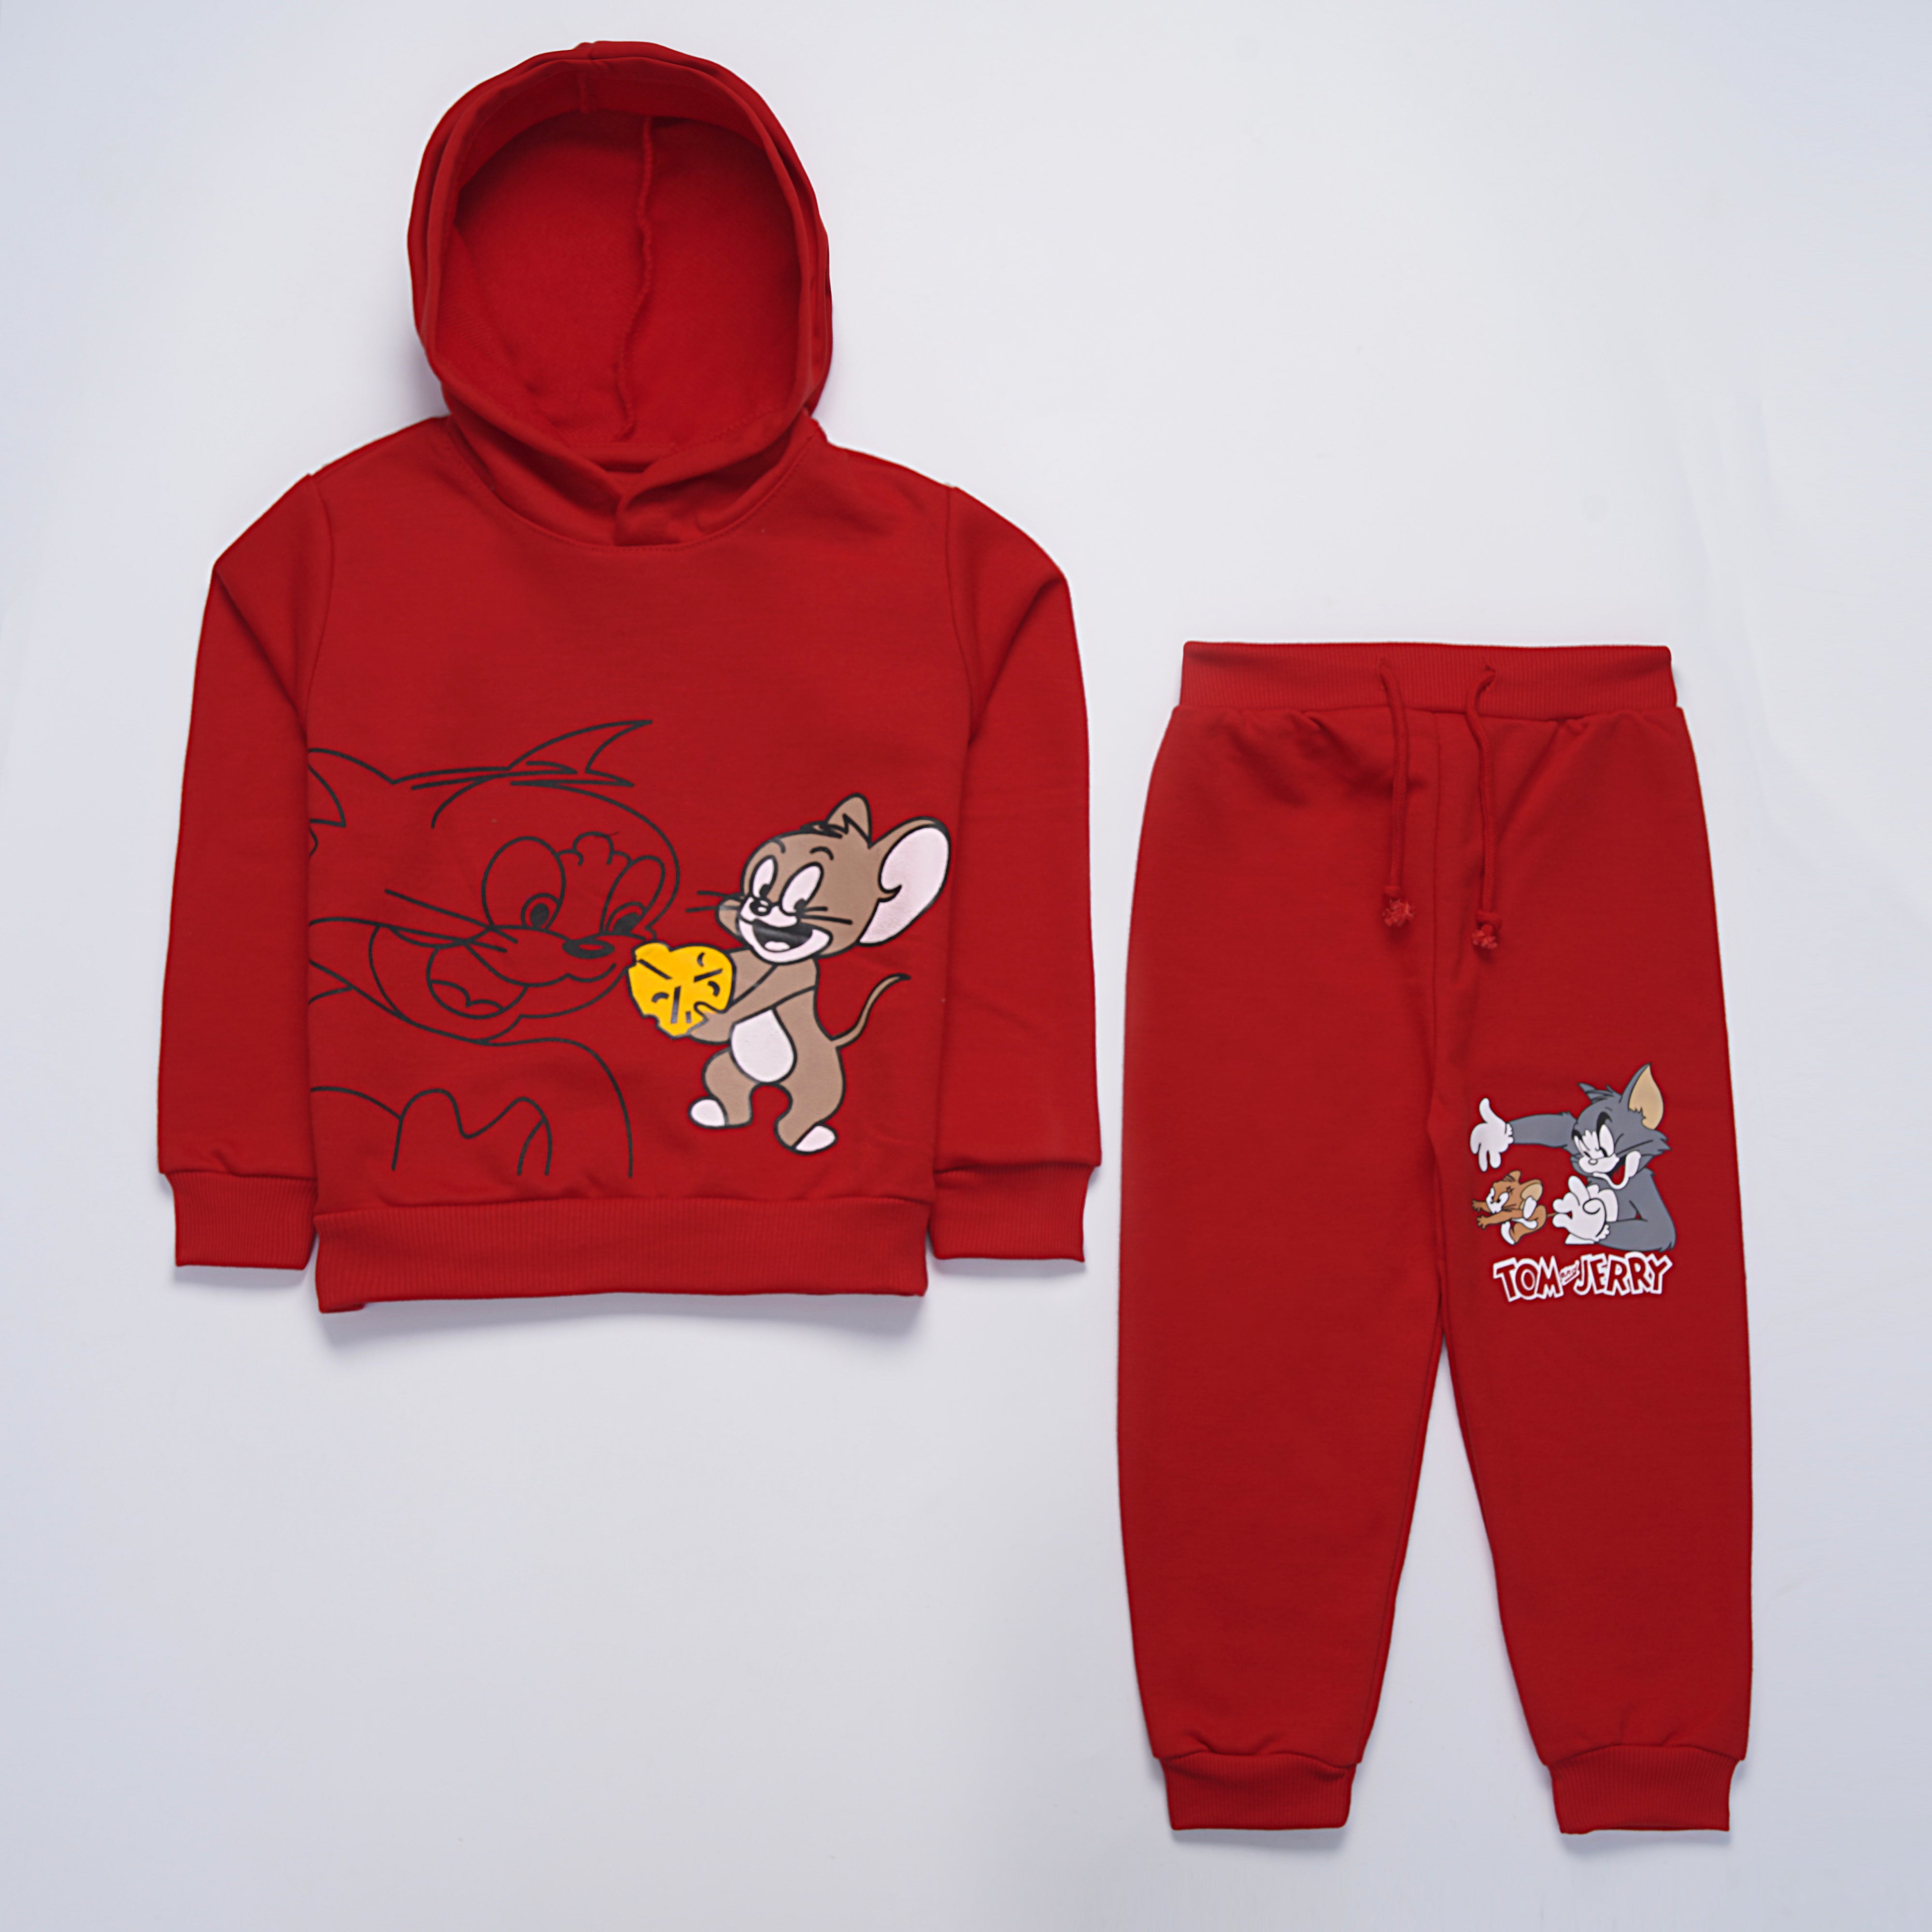 Boys Printed Track Suit  (7330)*